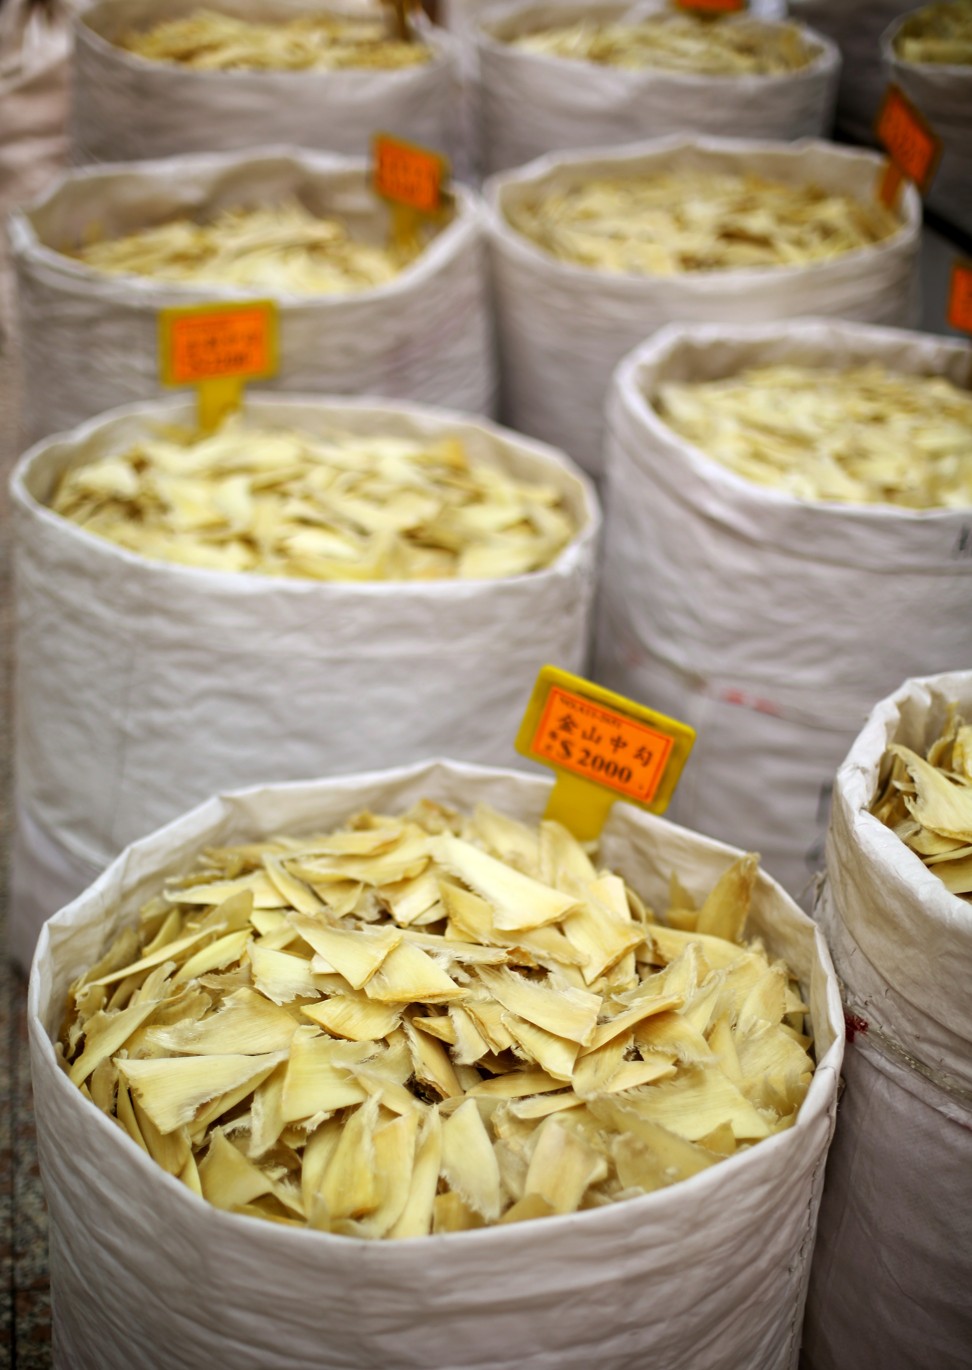 Shark fin on sale at a dried-seafood store in Hong Kong’s Western district. The city’s shark fin imports have halved since 2007 but it remains the hub for half the global trade in fins. Photo: Sam Tsang